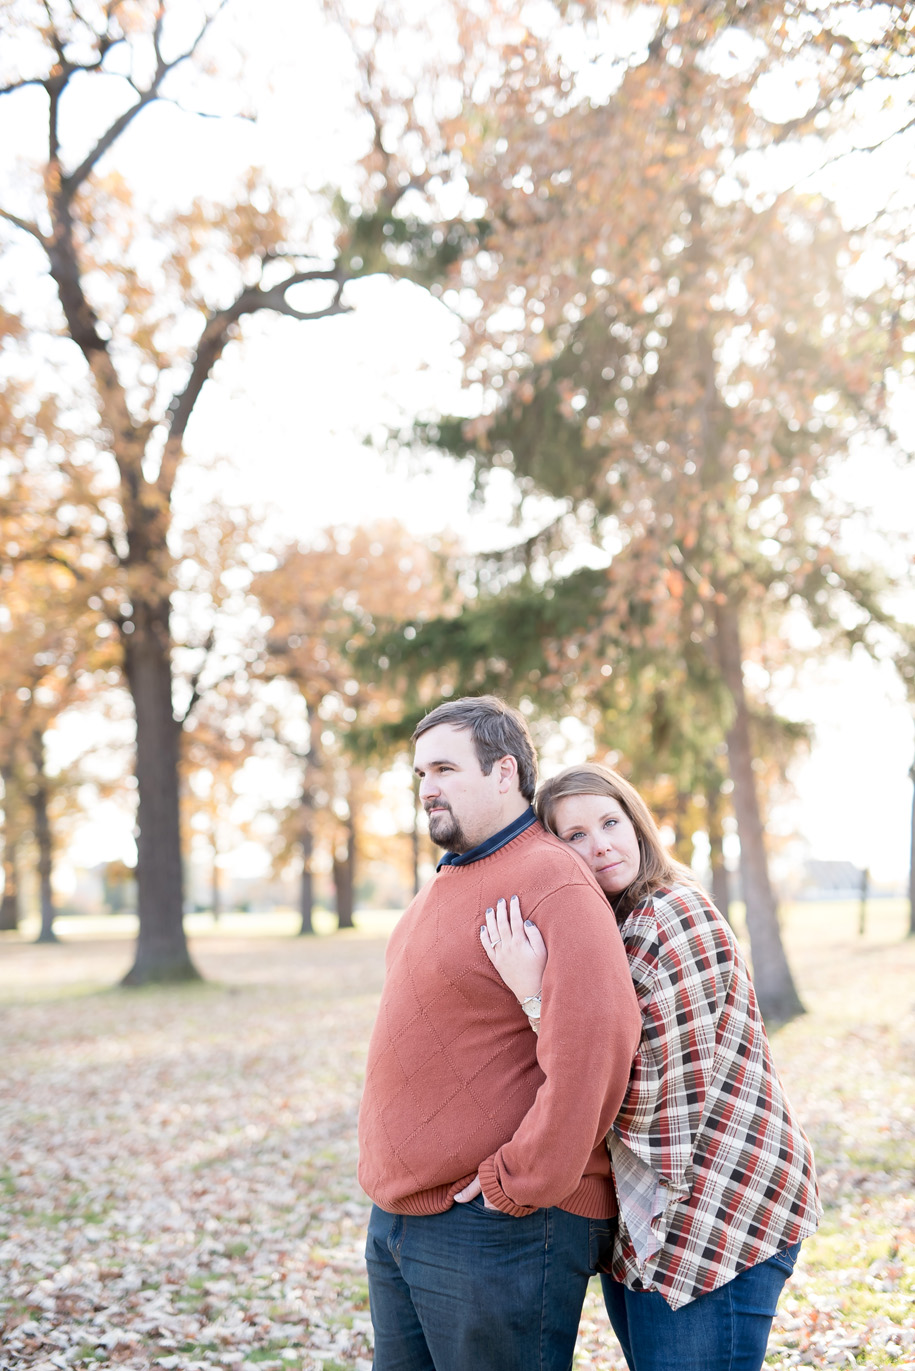 Fall outfit inspiration for a belle isle autumn engagement session in Detroit Michigan by Kari Dawson